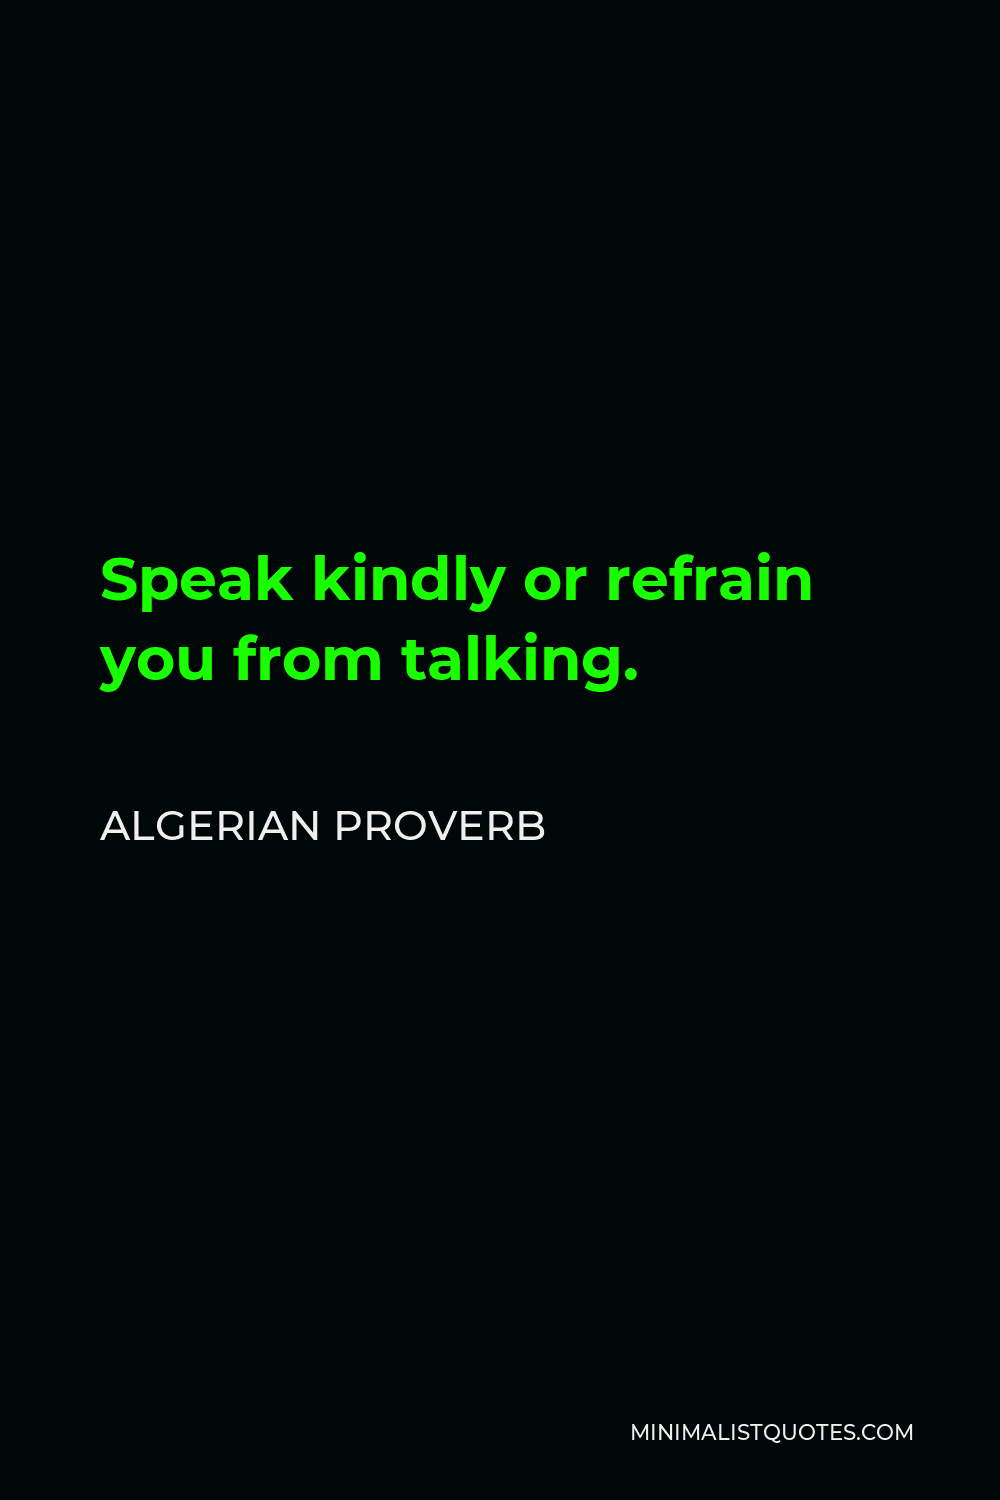 Algerian Proverb Quote - Speak kindly or refrain you from talking.